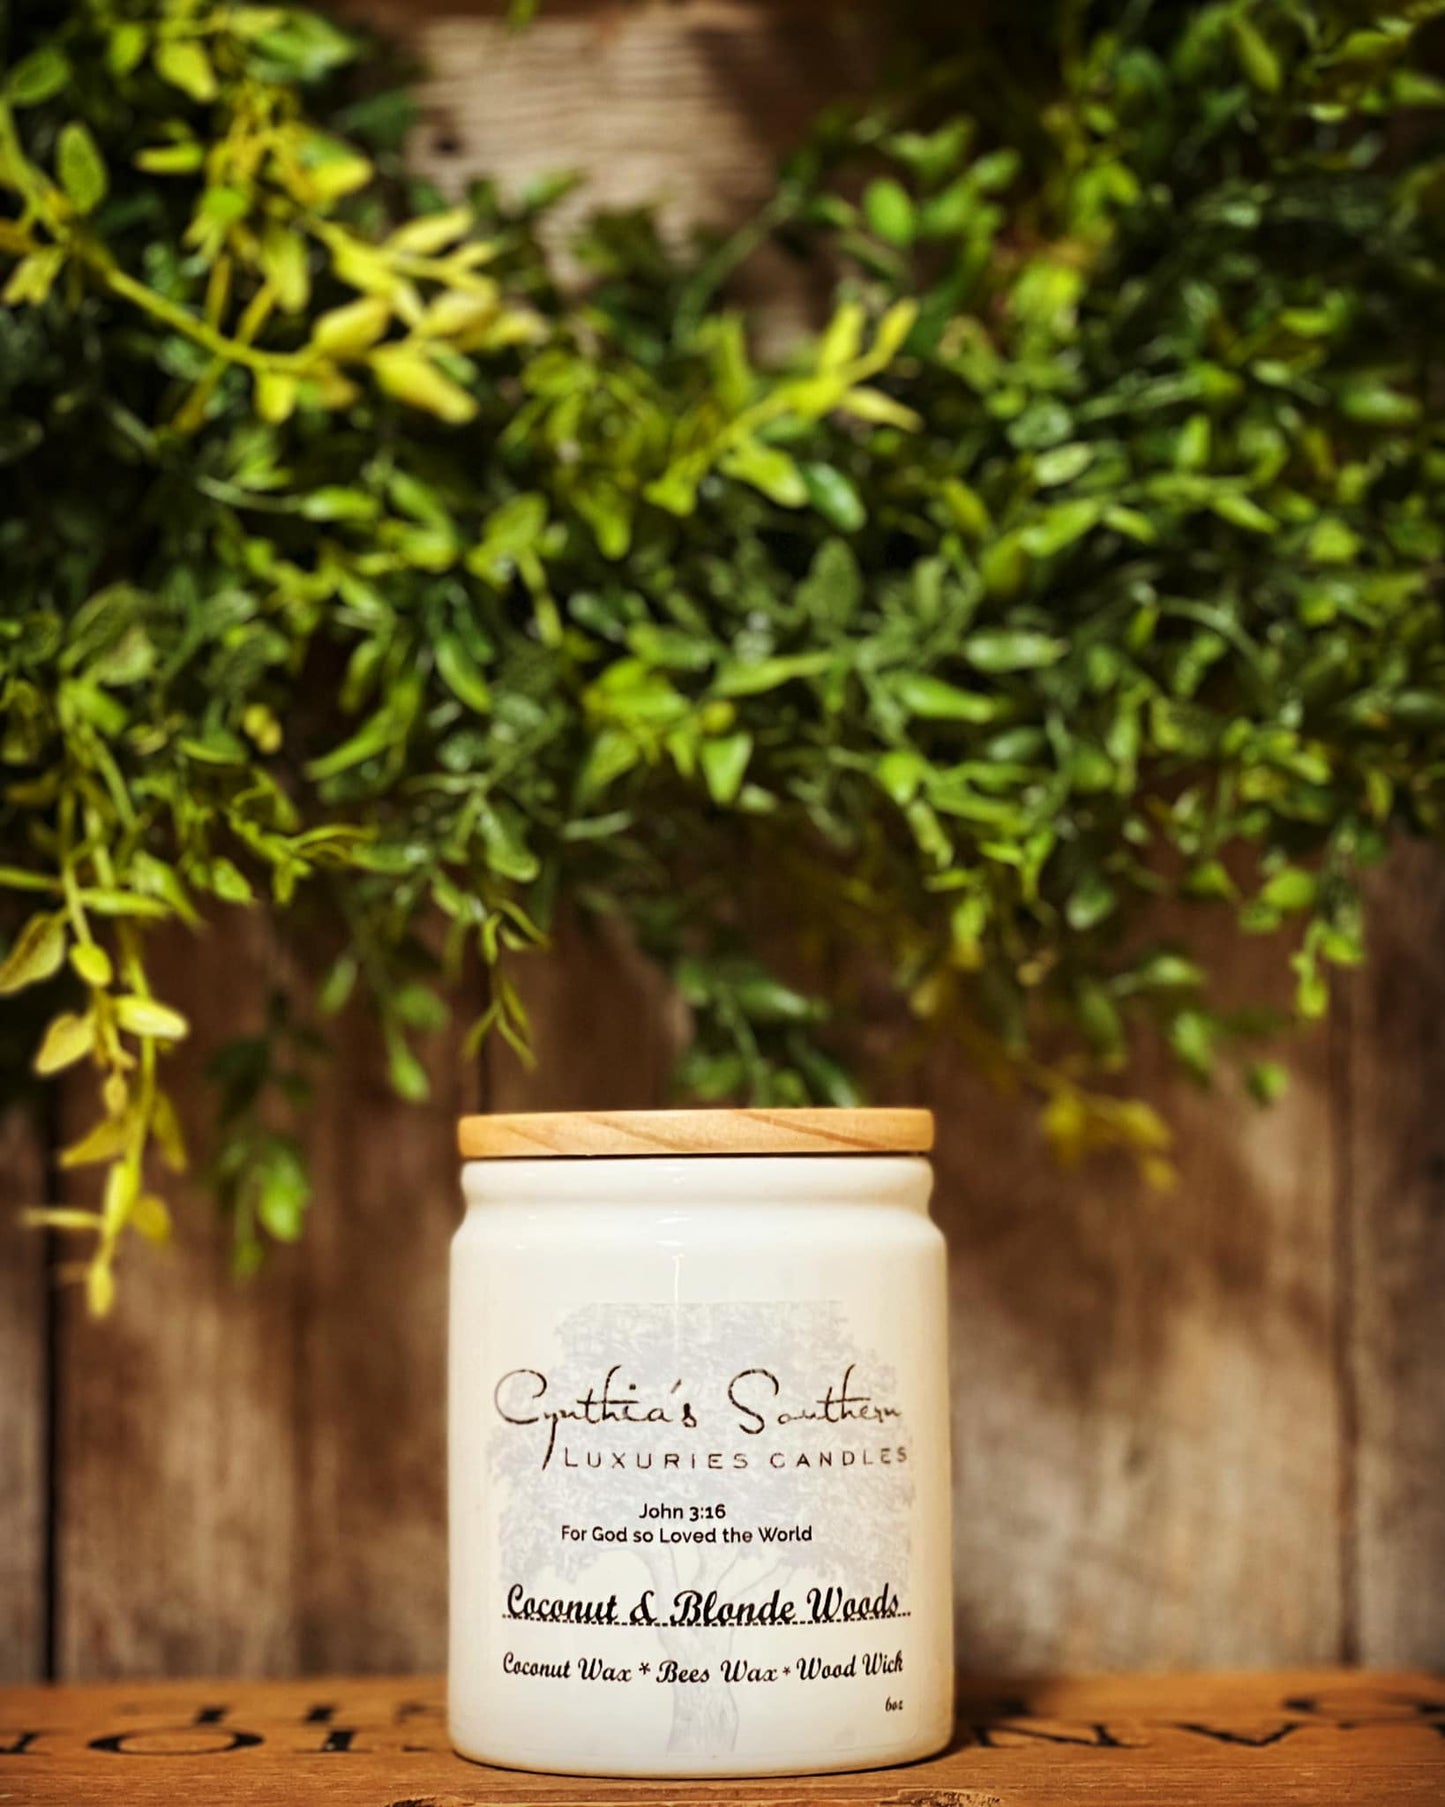 Coconut & Blonde Woods Candle